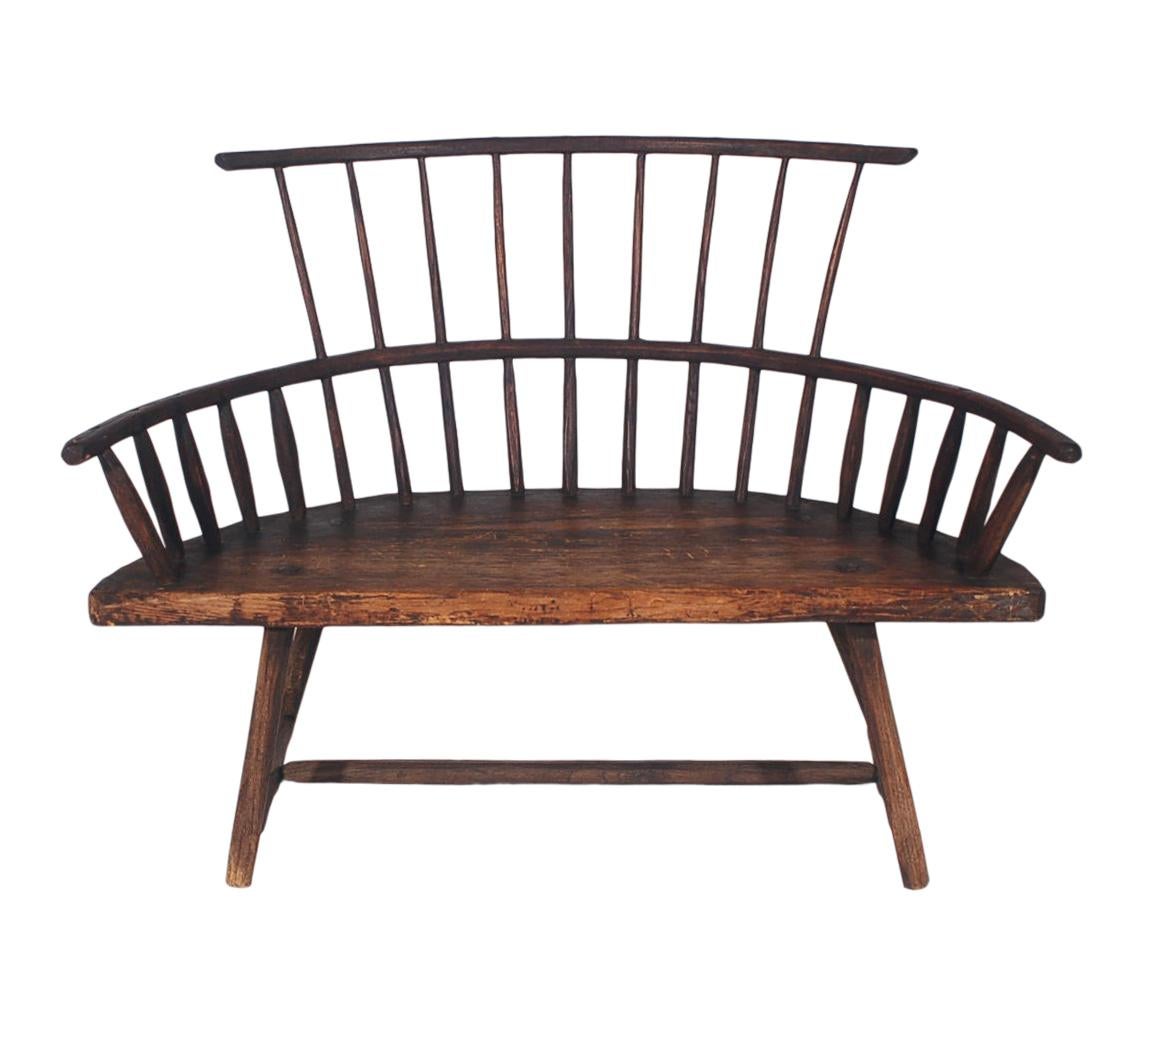 American Craftsman Antique Spindle Back Windsor Bench in Pine with a Modern Form